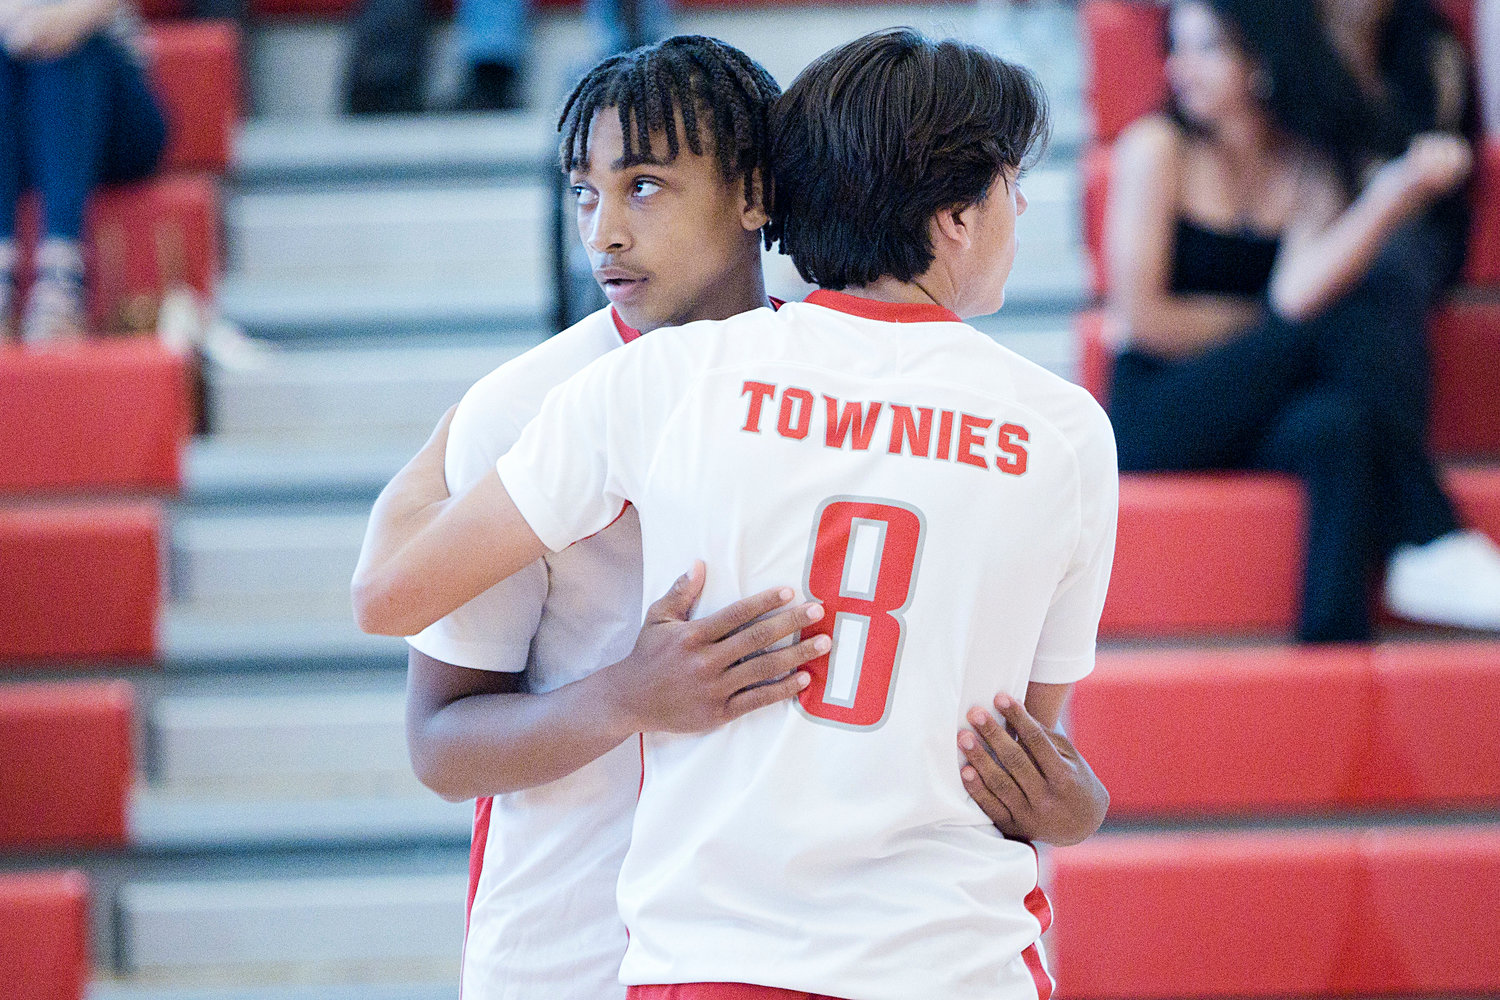 EPHS teammates Xavier Hazard and Brett Schwab exchange a hug after the Townies lost their Division II boys' volleyball semifinal match to Westerly, Wednesday, June 8.